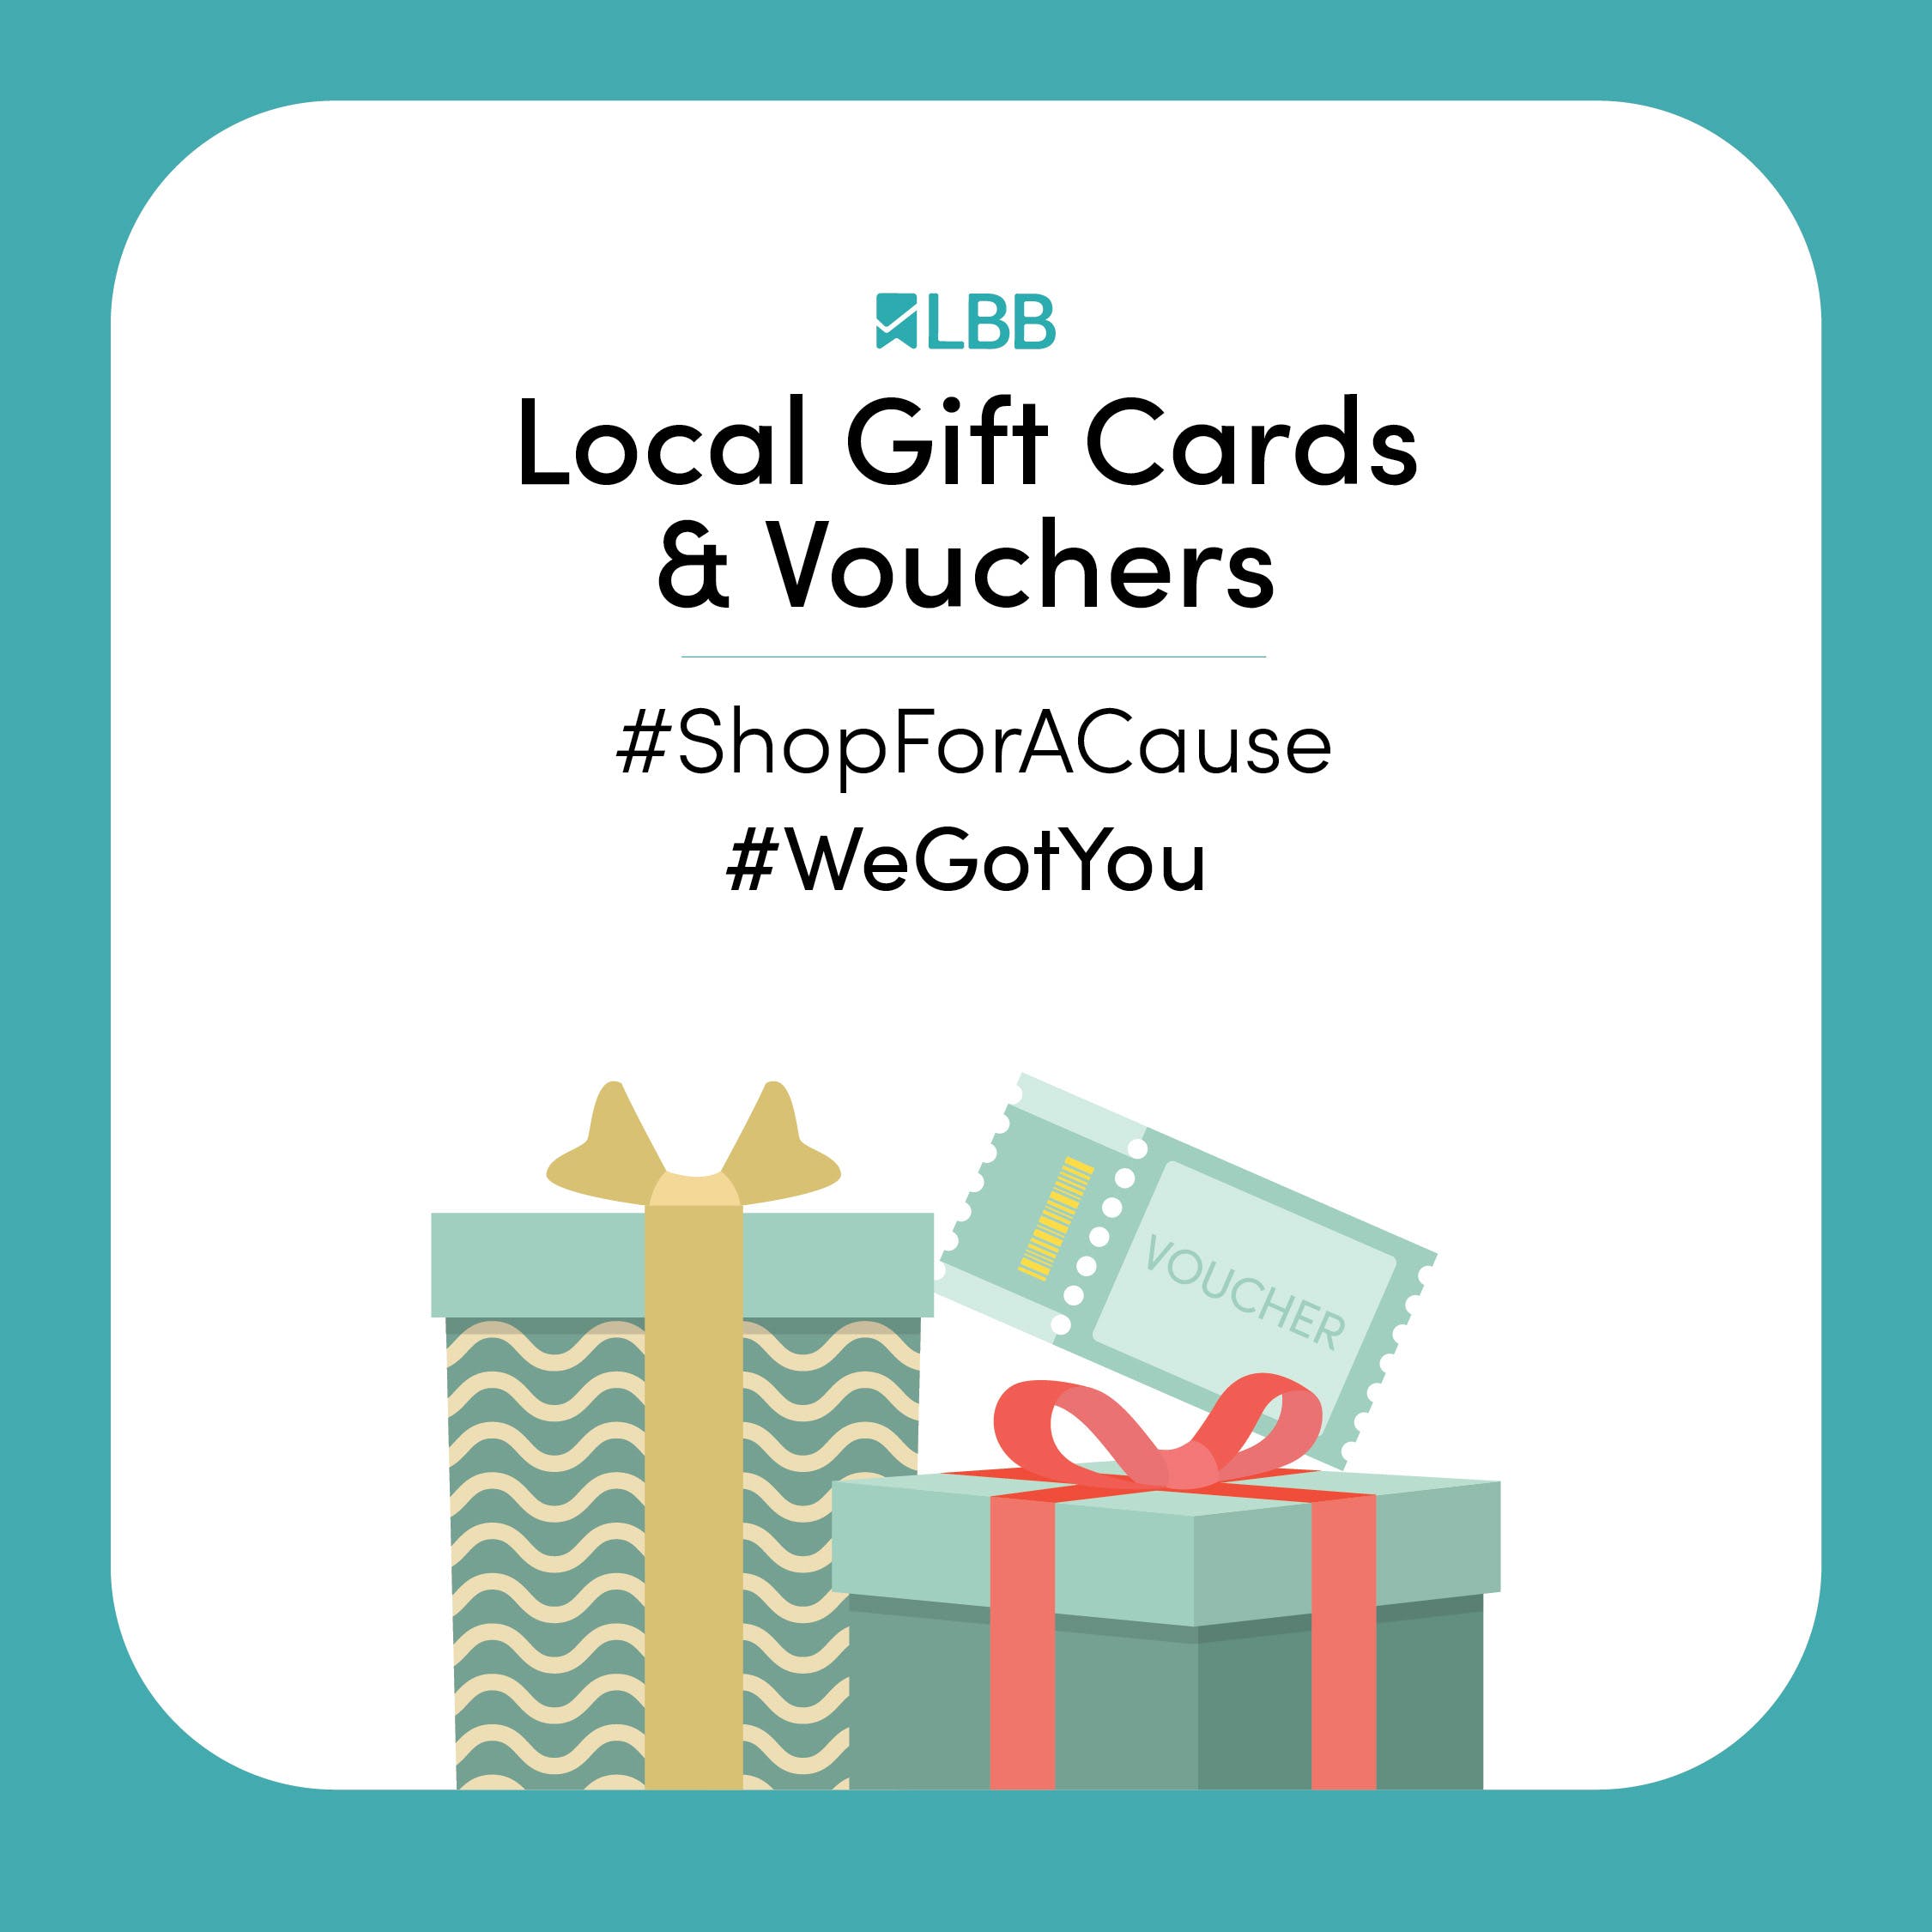 Aggregate more than 61 nearby gift card best